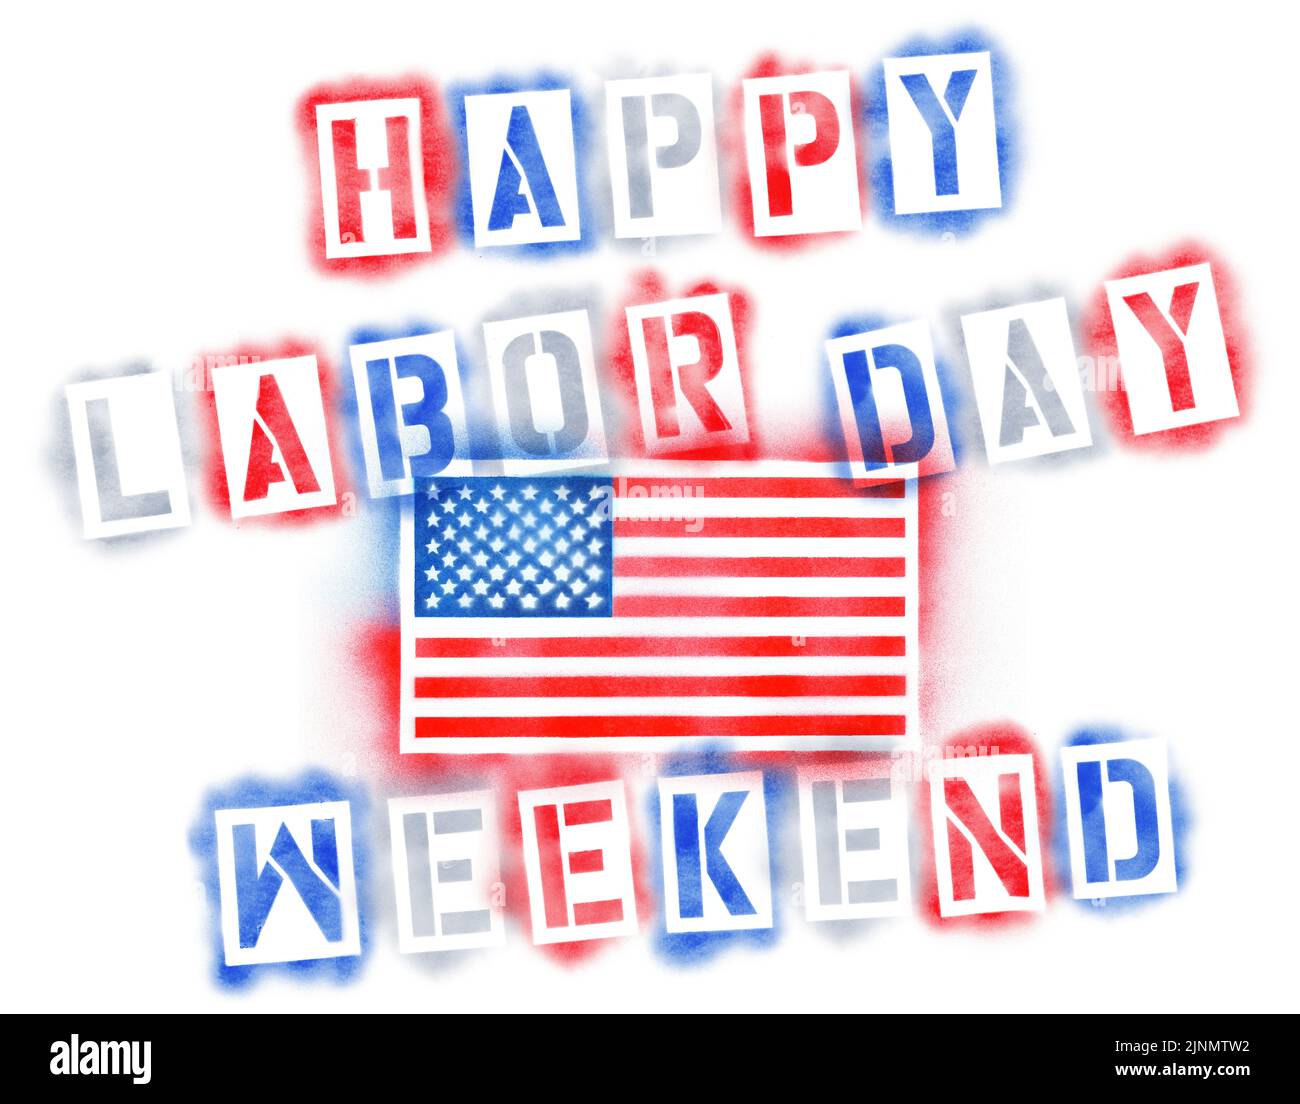 American USA flag and Happy Labor Day weekend text in red, white, and blue spray paint stencils isolated on white Stock Photo